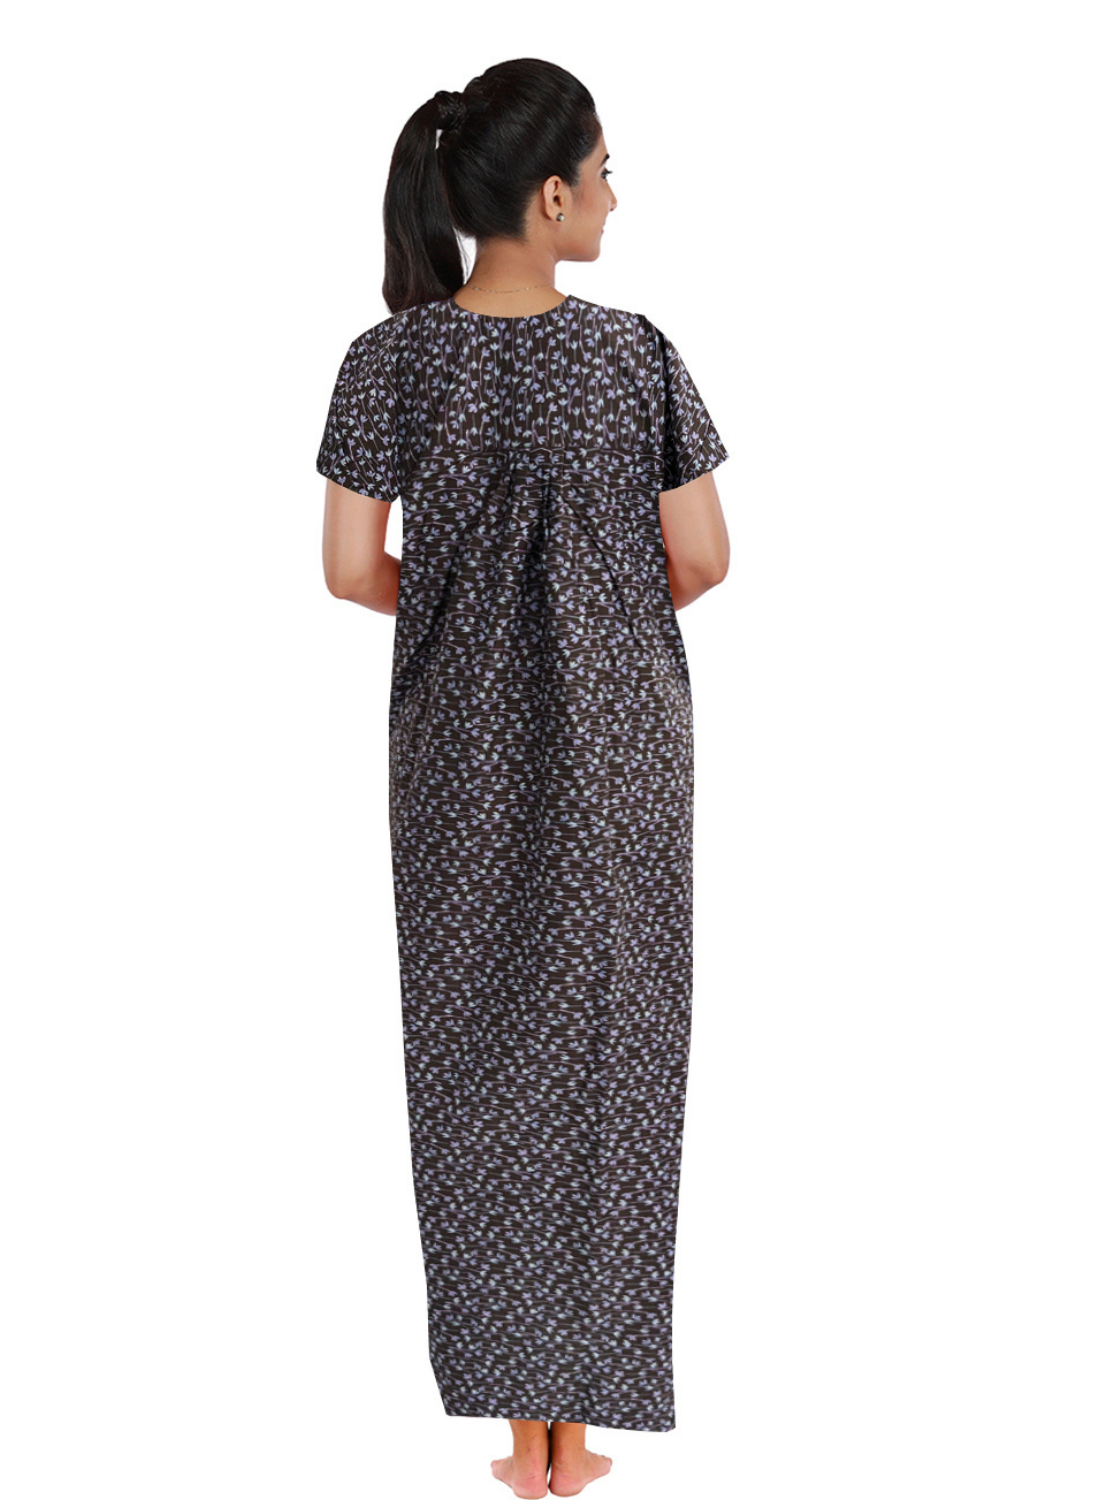 MANGAI Cotton PLEATED Model 3XL Size Nighties - Fancy Neck | With Side Pocket |Shrinkage Free Nighties | Trendy Collection's for Trendy Women's